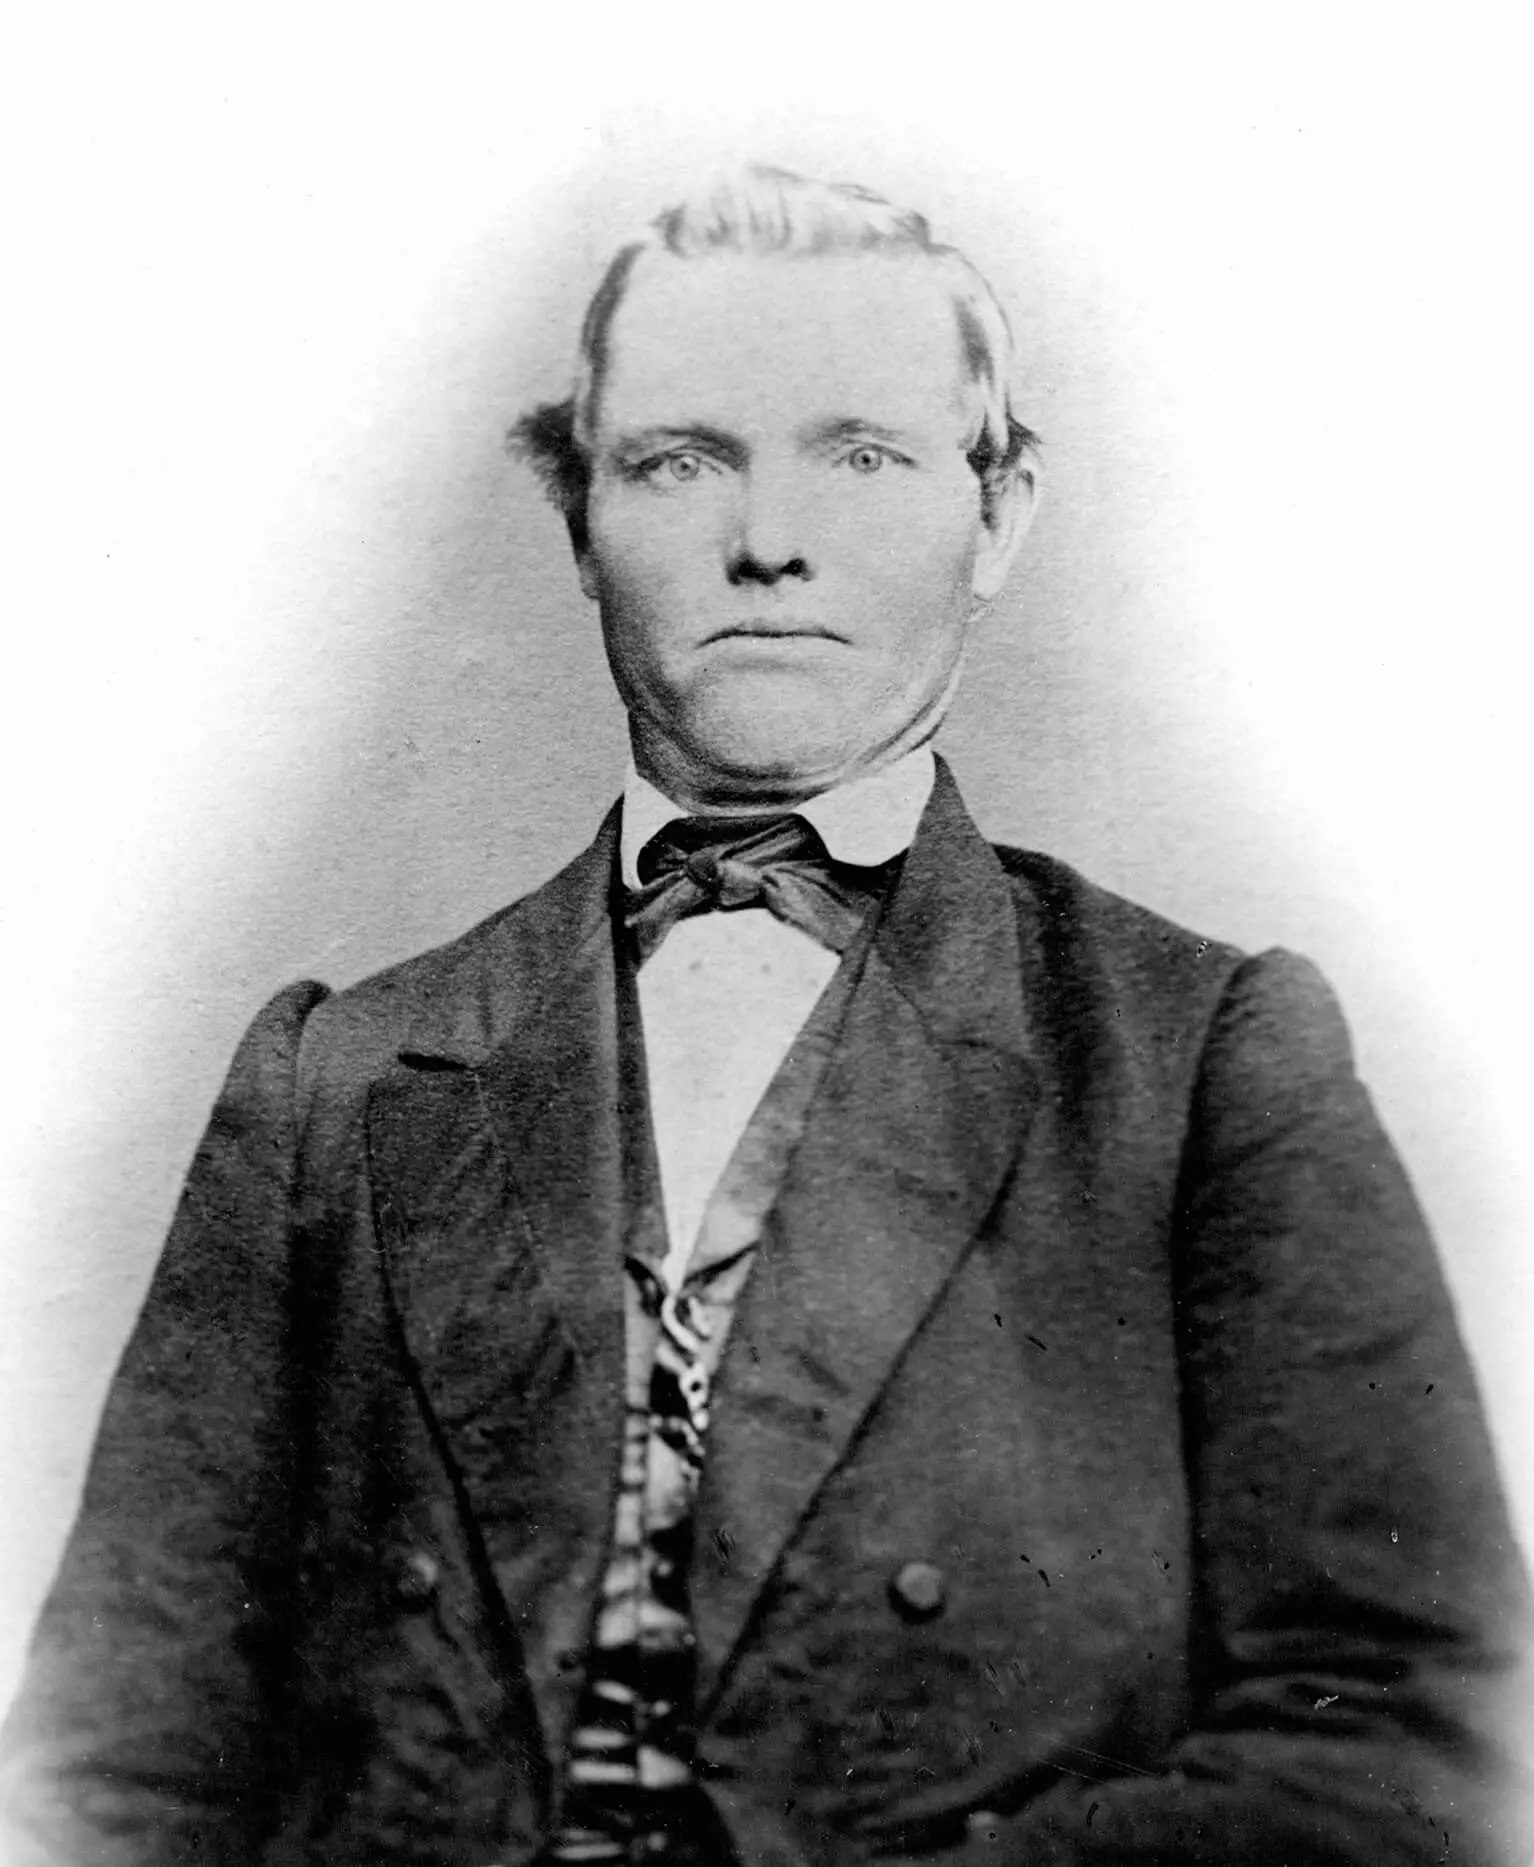 A white man in a three-piece suit and bow-tie poses for a portrait staring directly at the camera with a frown.